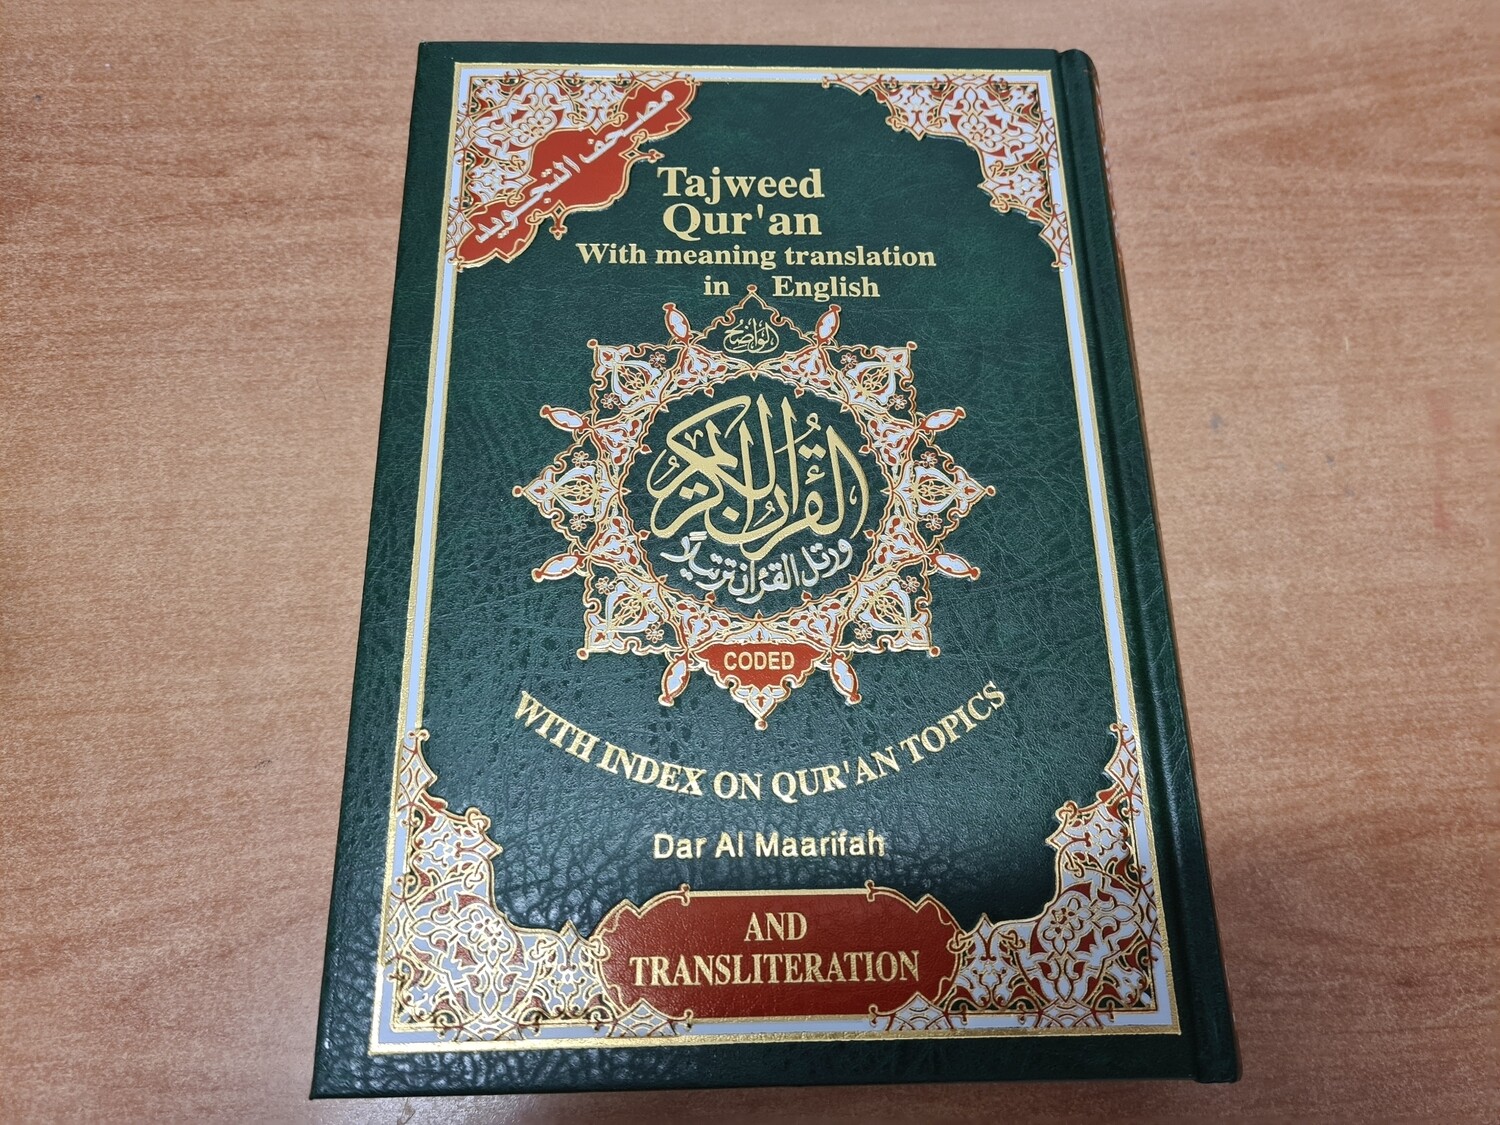 Tajweed quran with meaning translation in English